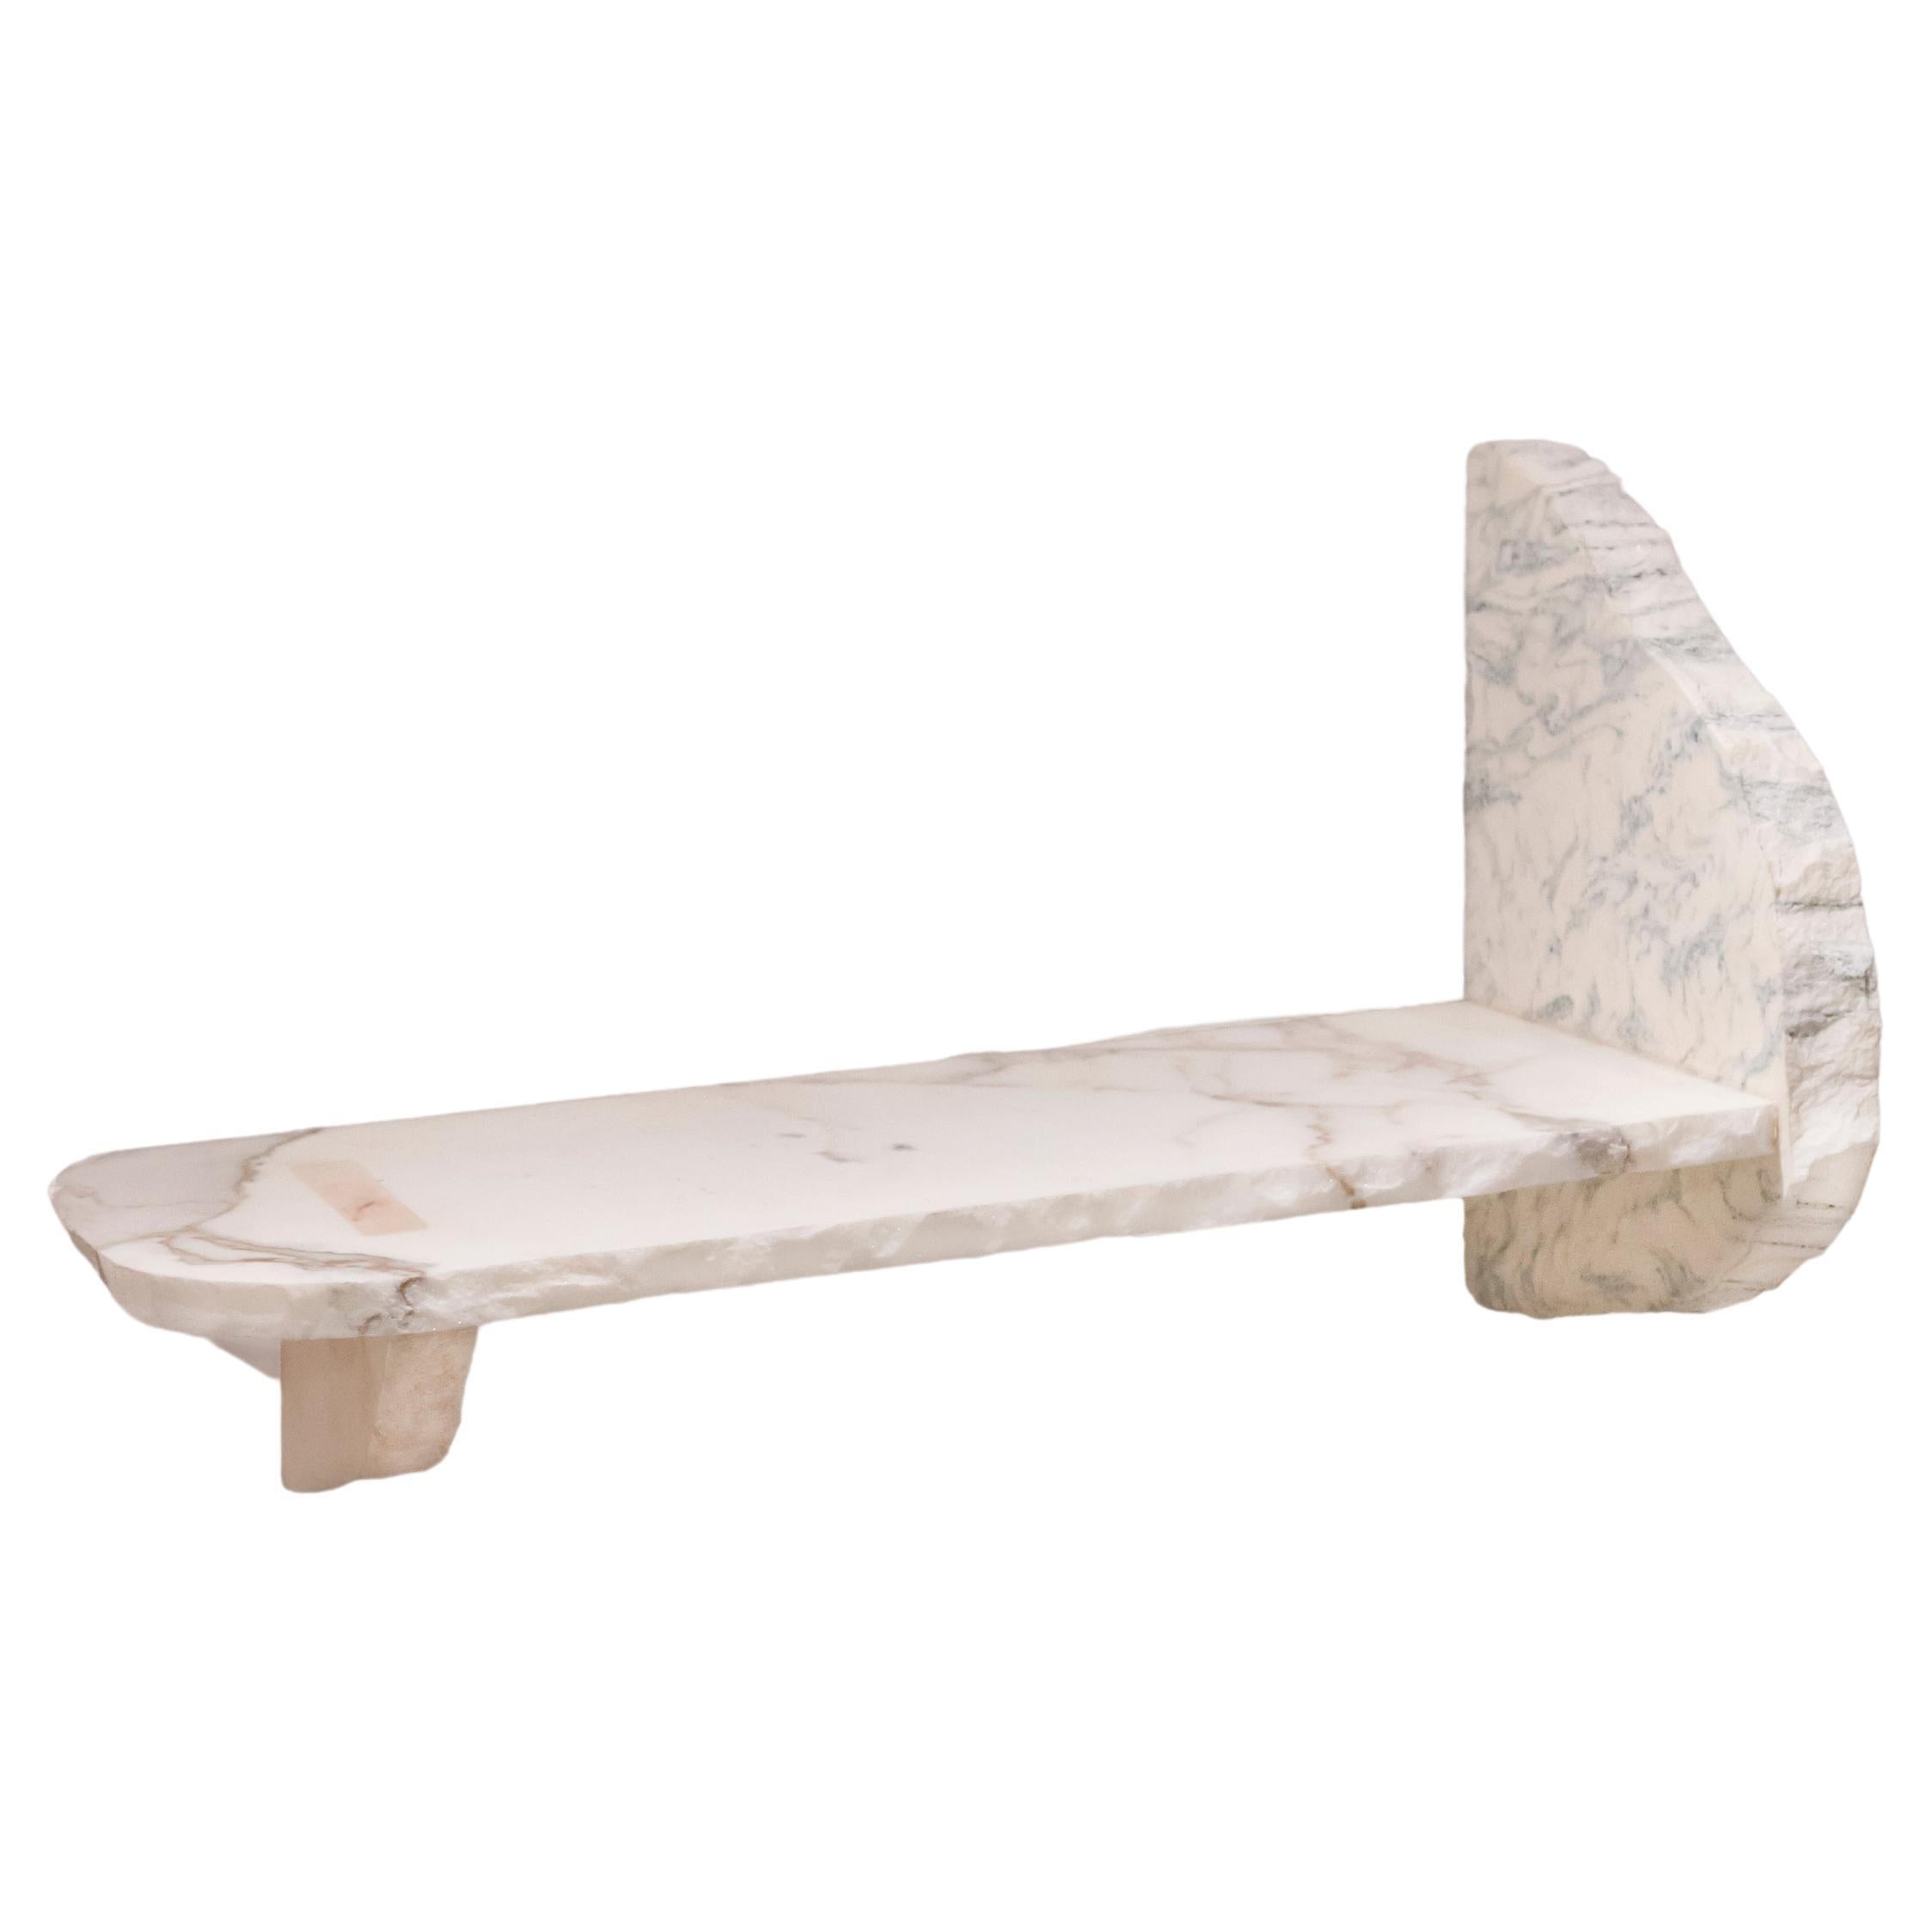 21st Century Contemporary Mixed Marble Shelf Handmade Italy by Ilaria Bianchi For Sale